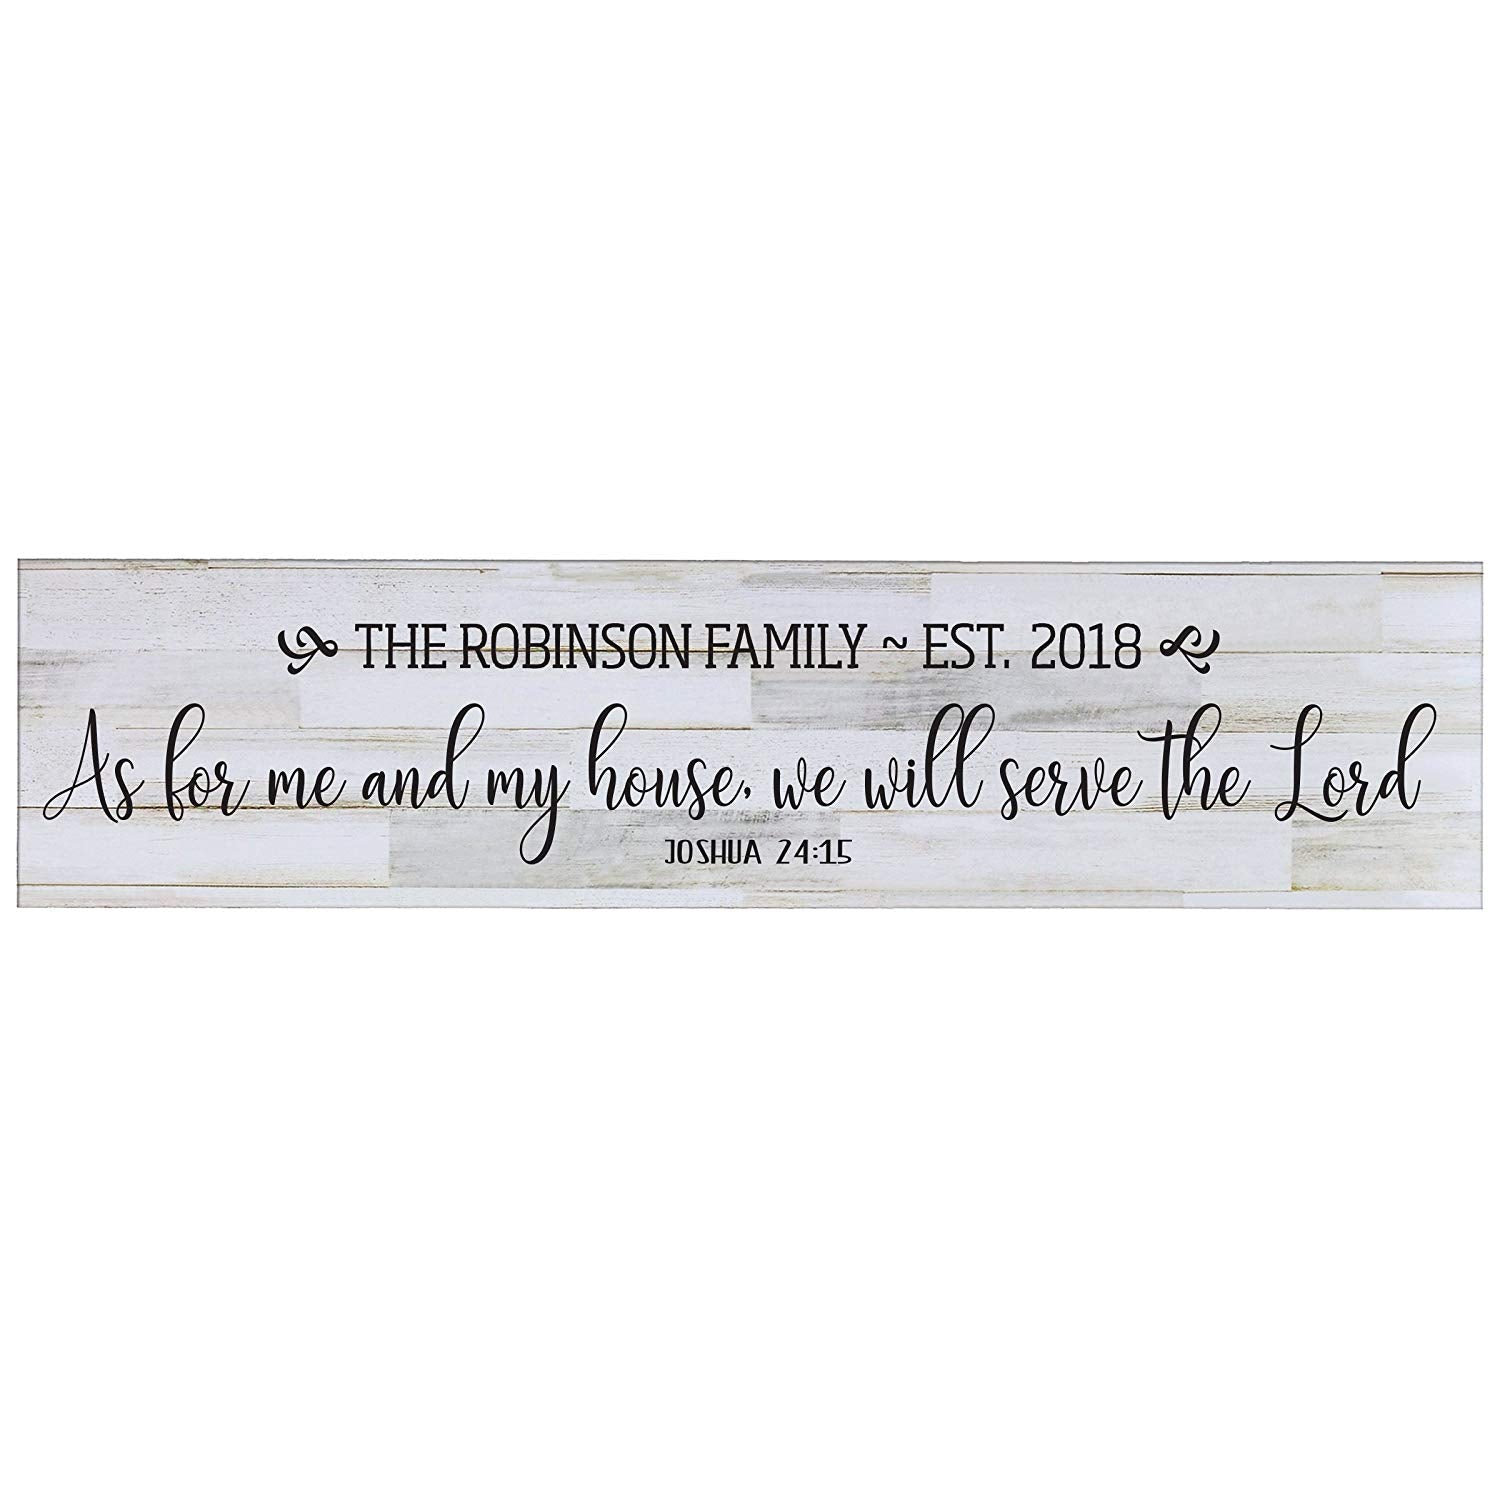 As For Me and My Home Wooden Wall Sign Art Size 10 x 40 - LifeSong Milestones